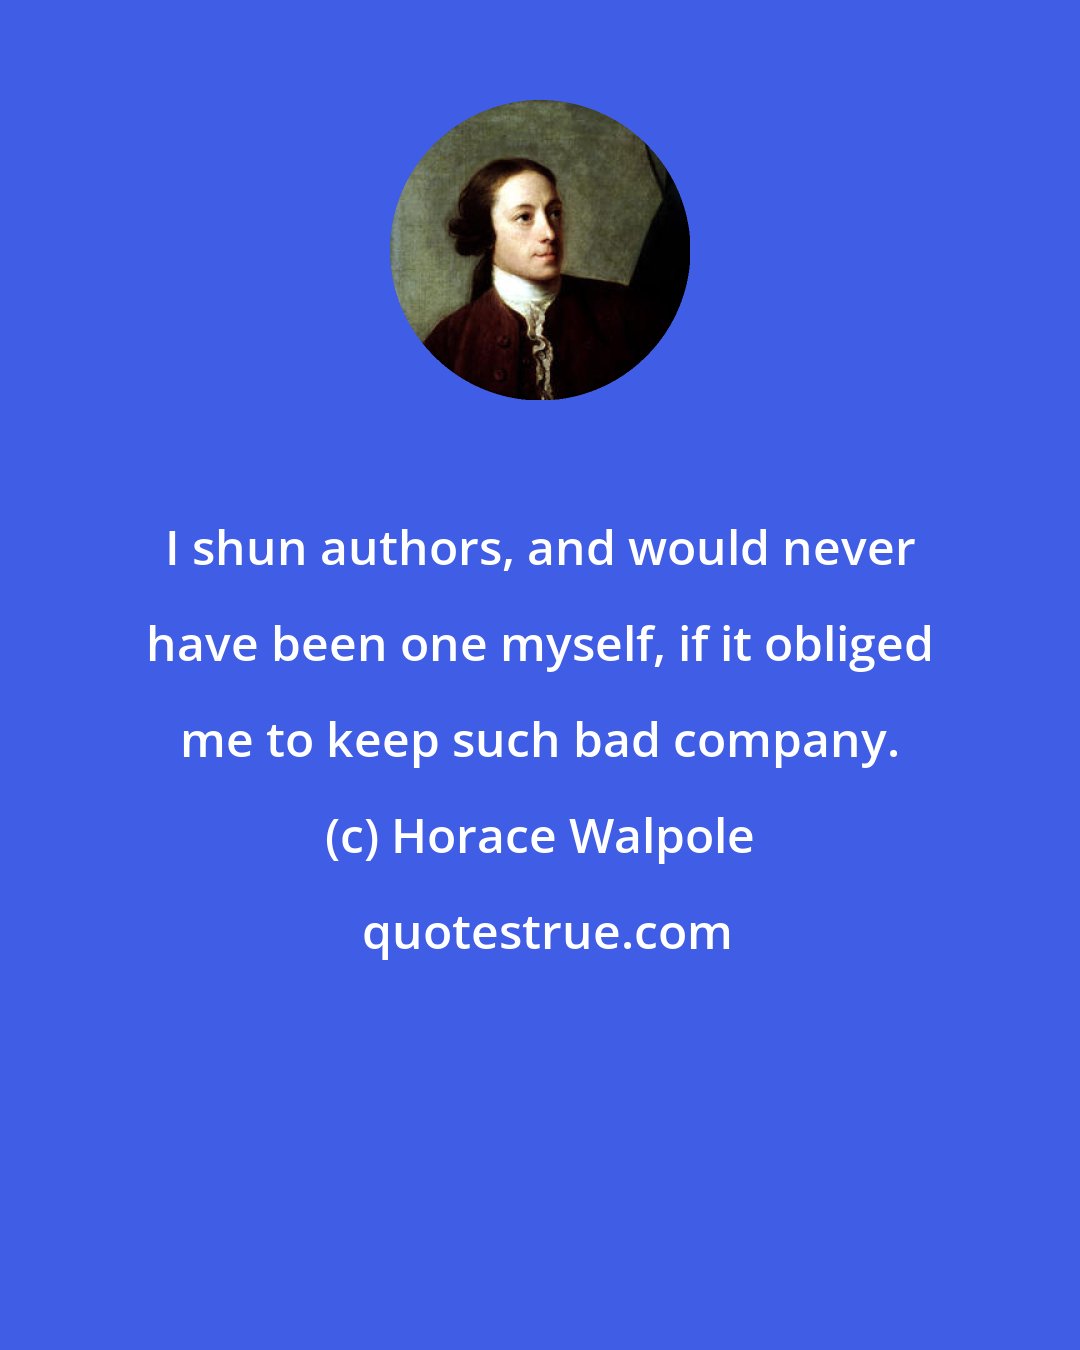 Horace Walpole: I shun authors, and would never have been one myself, if it obliged me to keep such bad company.